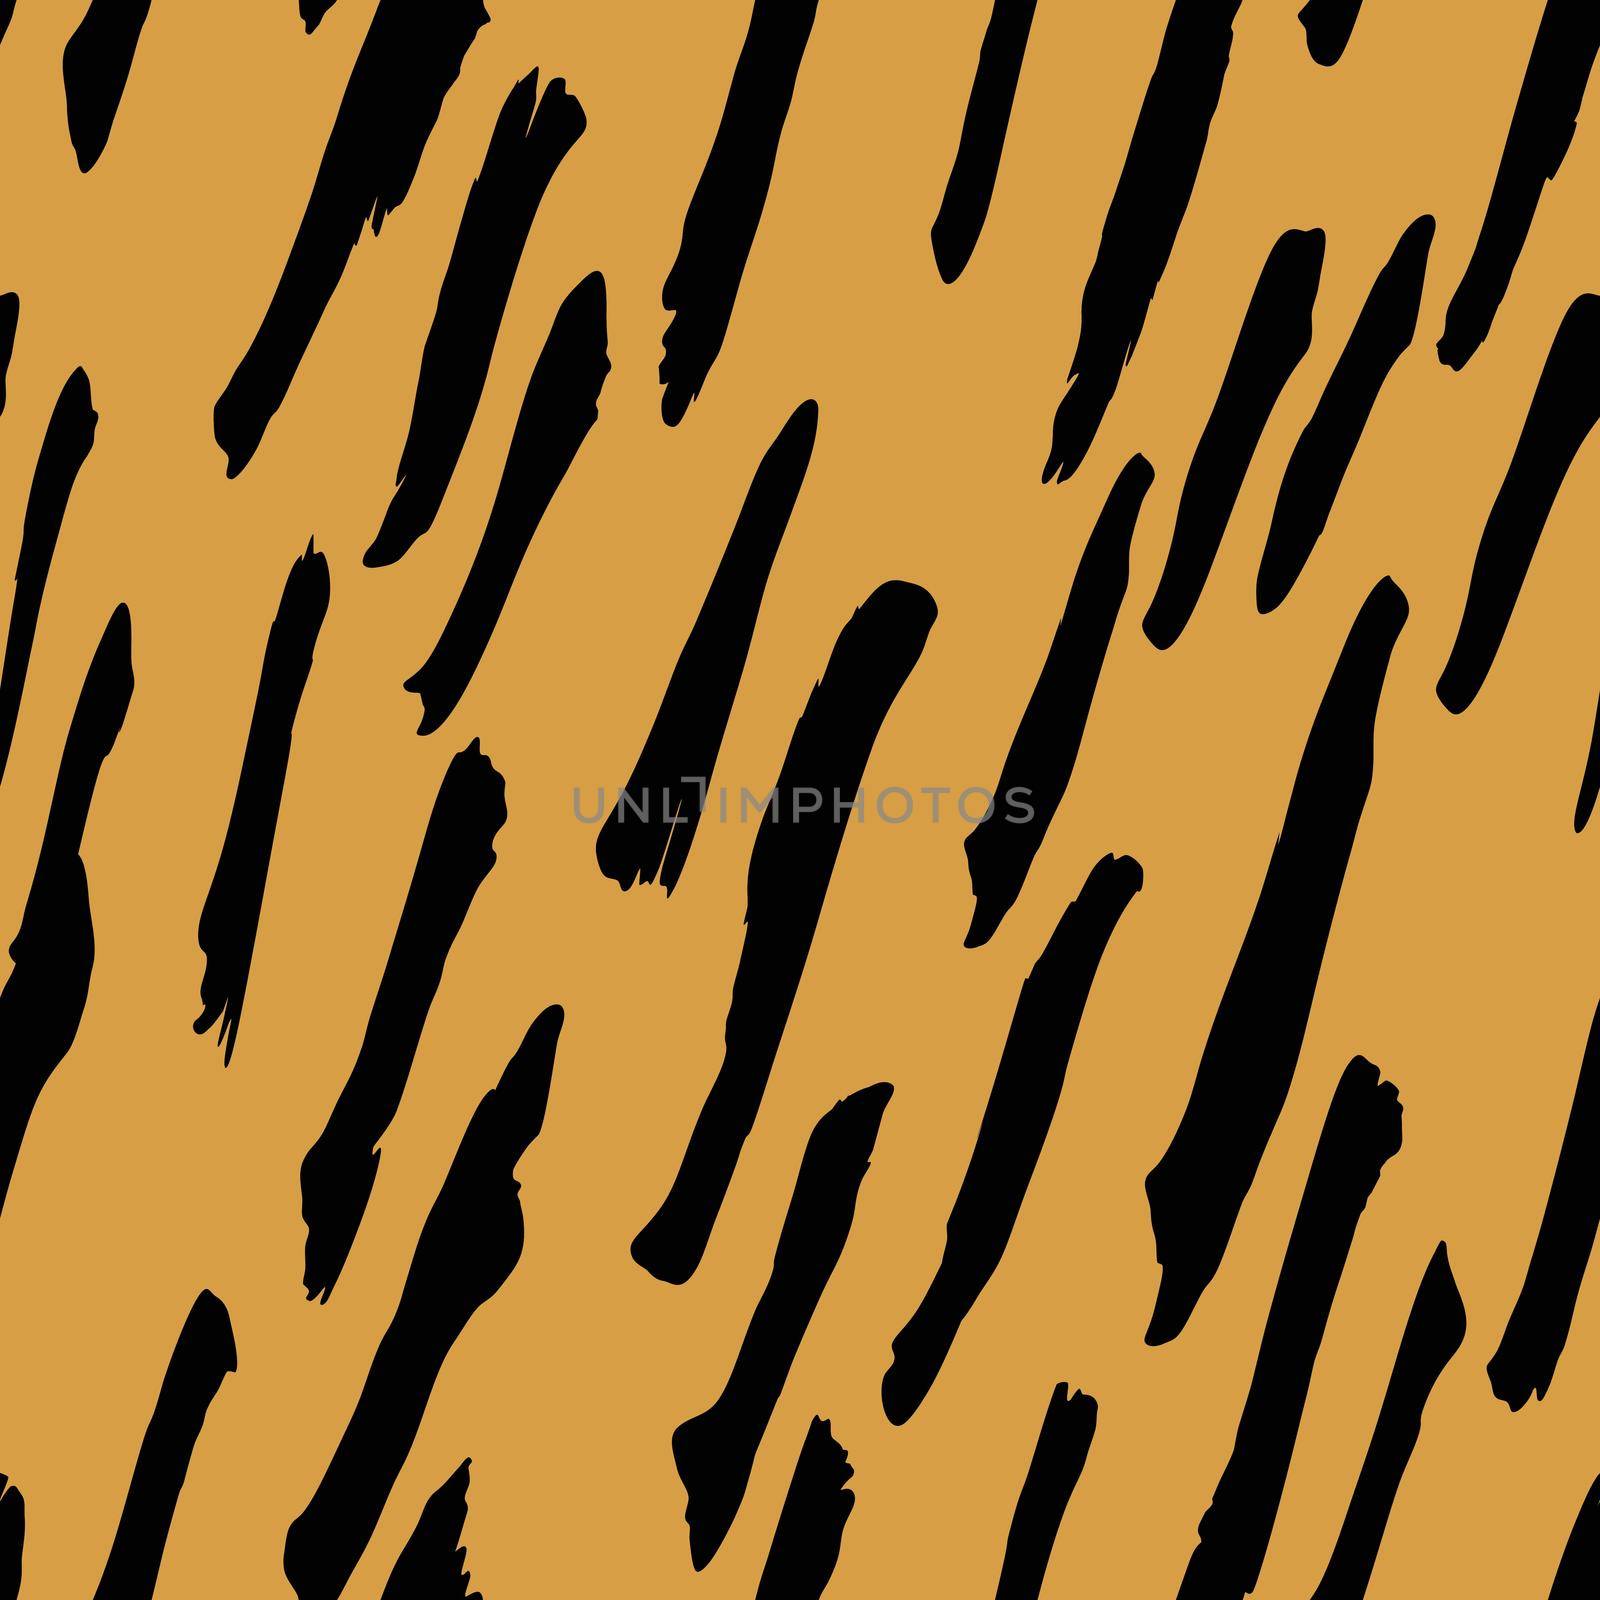 Abstract modern giraffe seamless pattern. Animals trendy background. Beige and black decorative vector stock illustration for print, card, postcard, fabric, textile. Modern ornament of stylized skin.